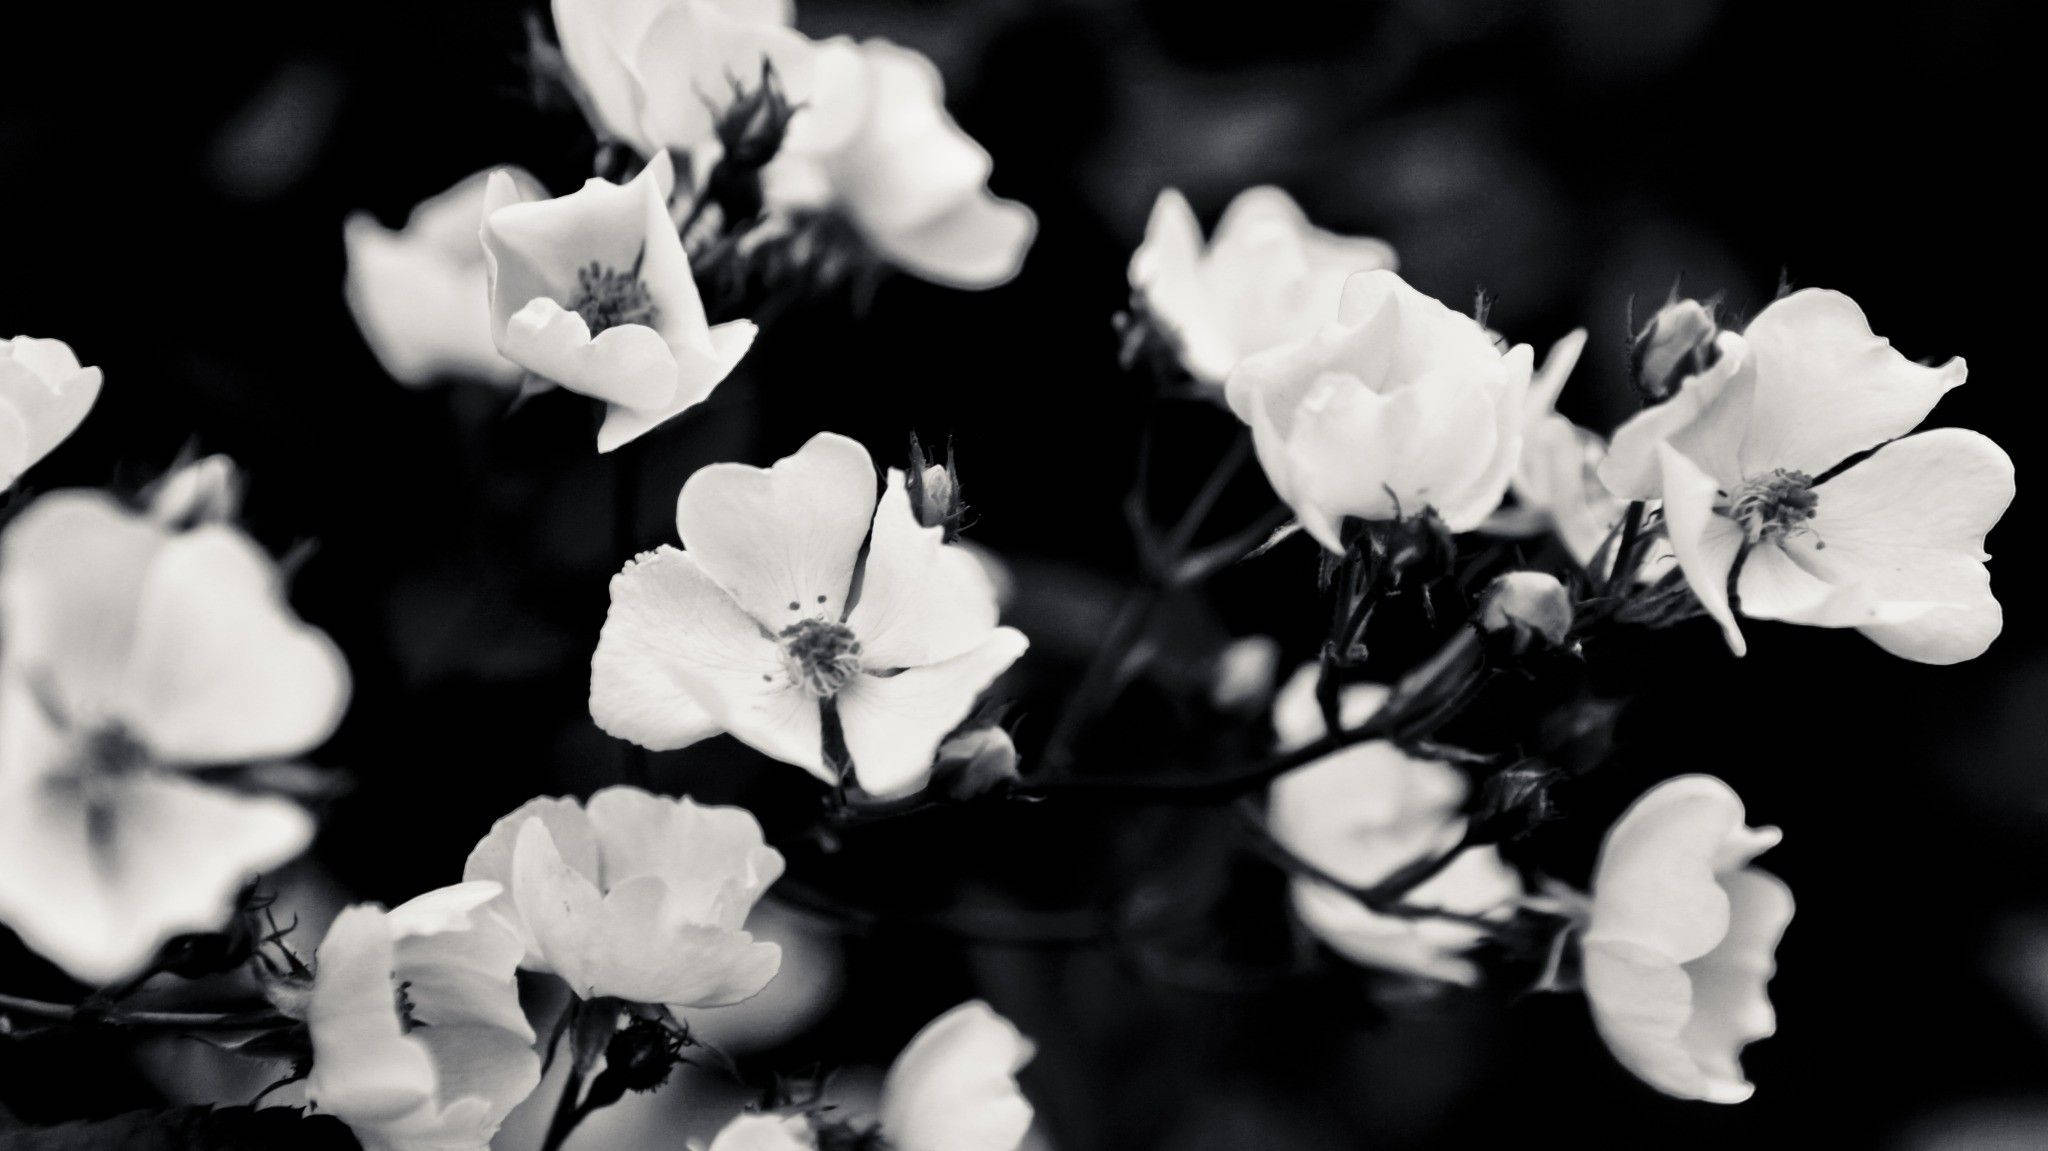 A black and white photo of flowers - Black and white